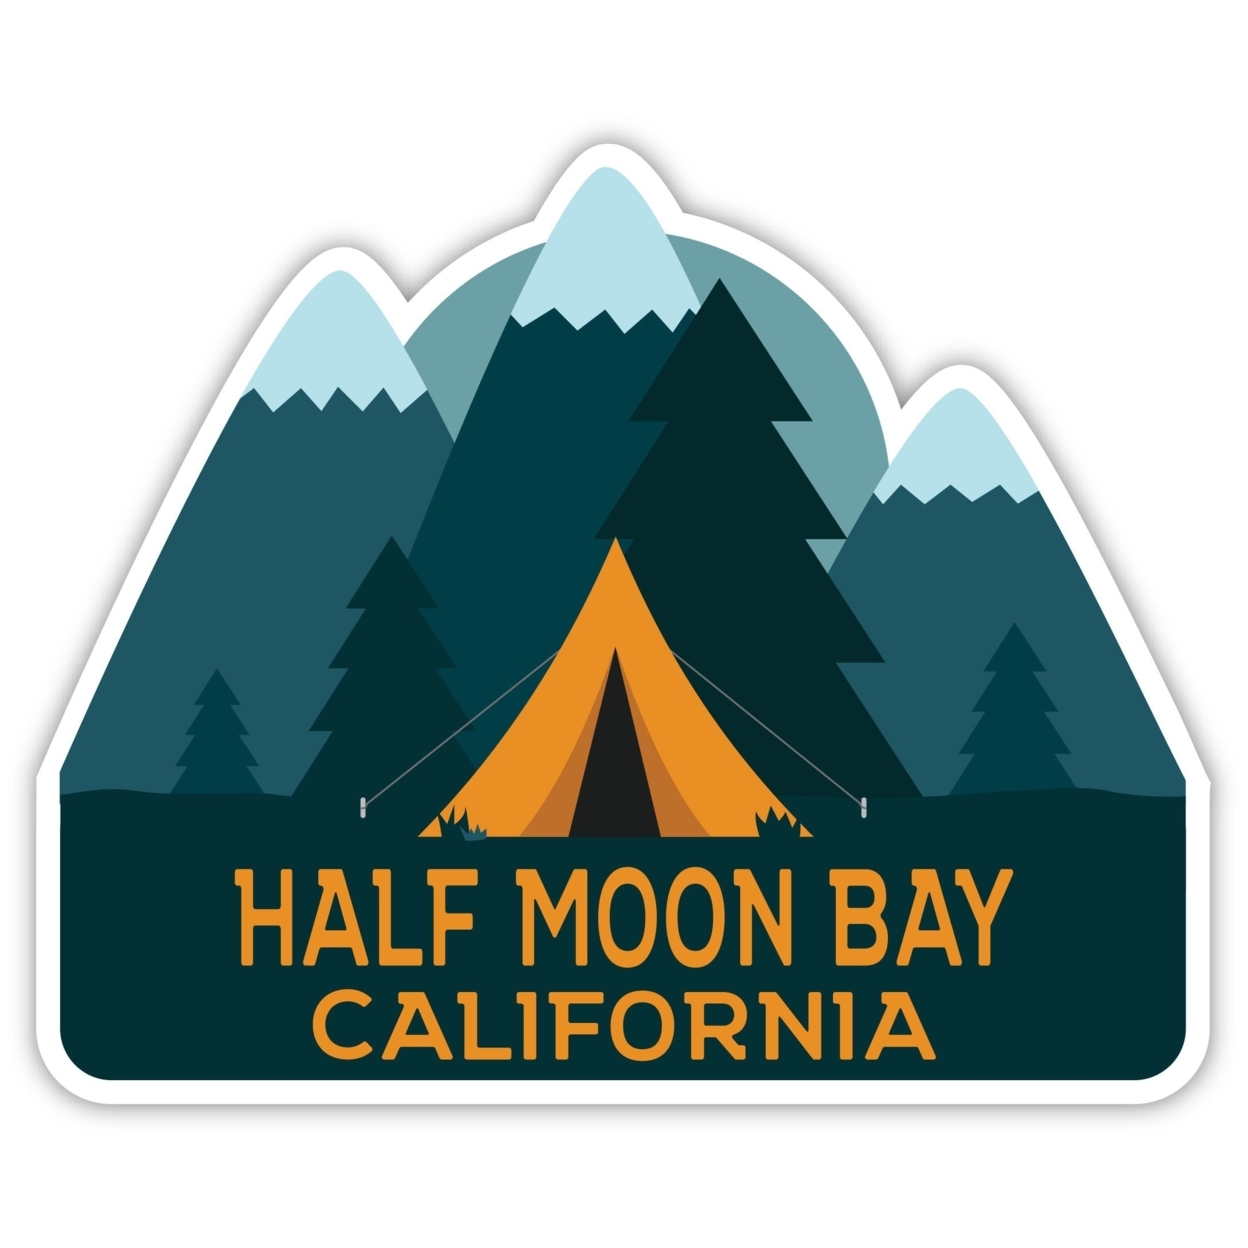 Half Moon Bay California Souvenir Decorative Stickers (Choose Theme And Size) - 4-Pack, 8-Inch, Tent